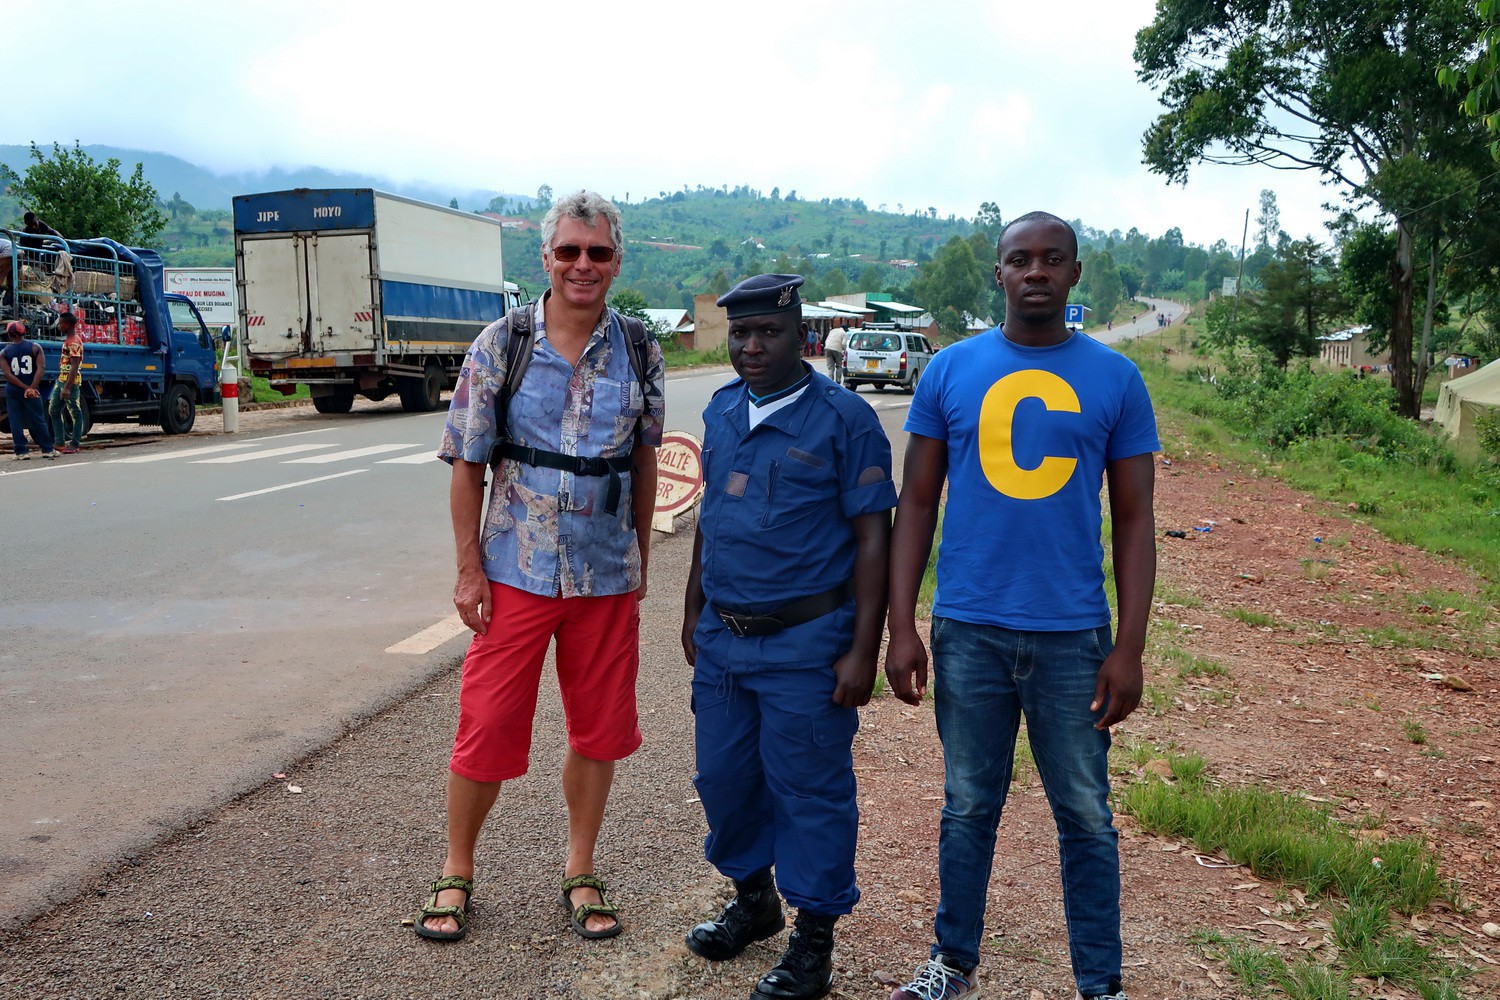 On the border to Burundi, where we had been rejected